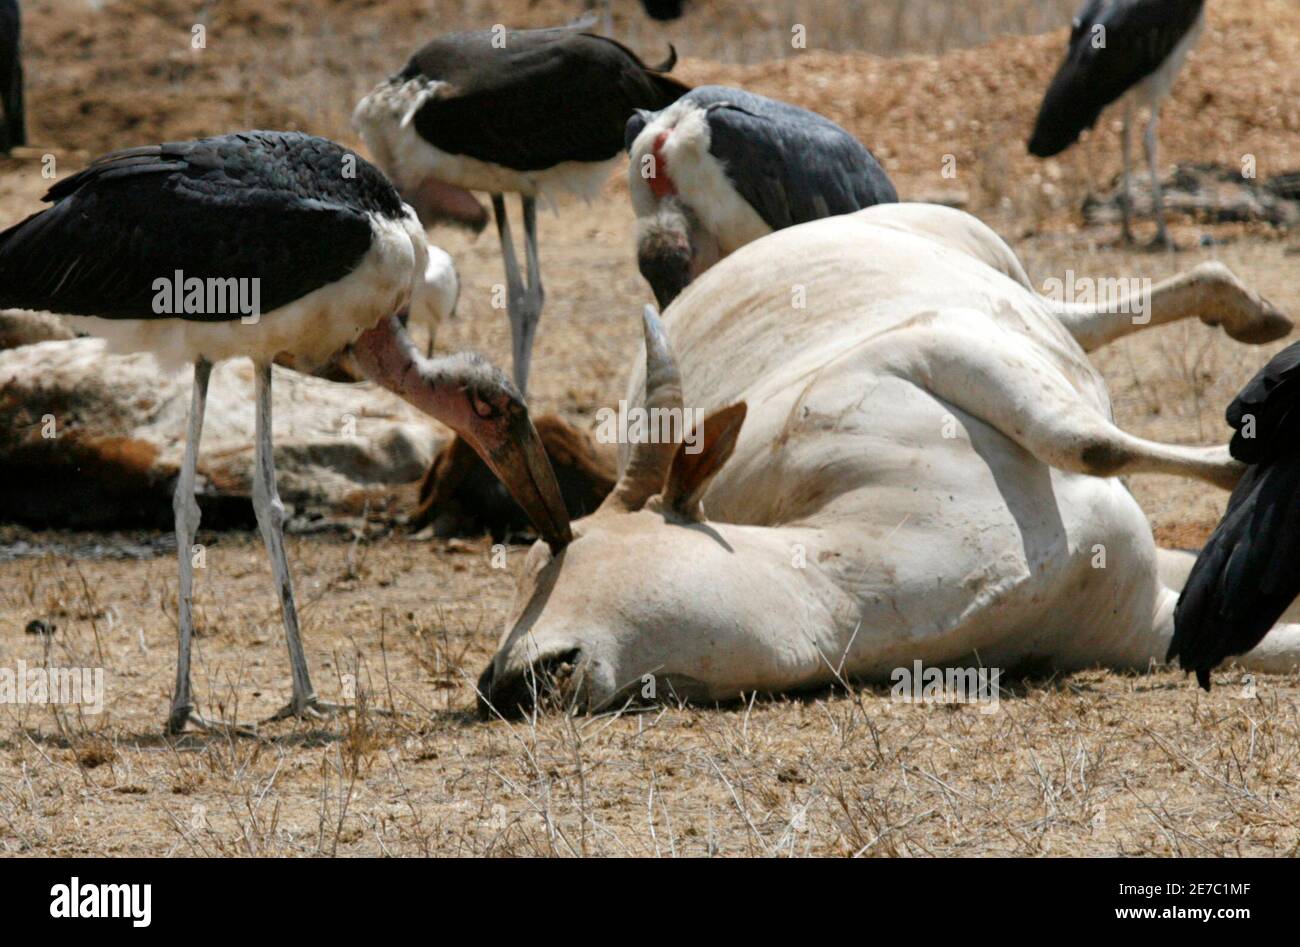 A marabou stork feeds on the carcass of a cow in a paddock near the Kenya Meat Commission (KMC) factory in Athi River, 50km (31 miles) east of the capital Nairobi, September 16, 2009. Farmers are making their way to the recently revived KMC in a bid to cut their losses by selling their drought-stricken livestock for meat. REUTERS/Thomas Mukoya (KENYA DISASTER ENVIRONMENT SOCIETY BUSINESS AGRICULTURE) Stock Photo